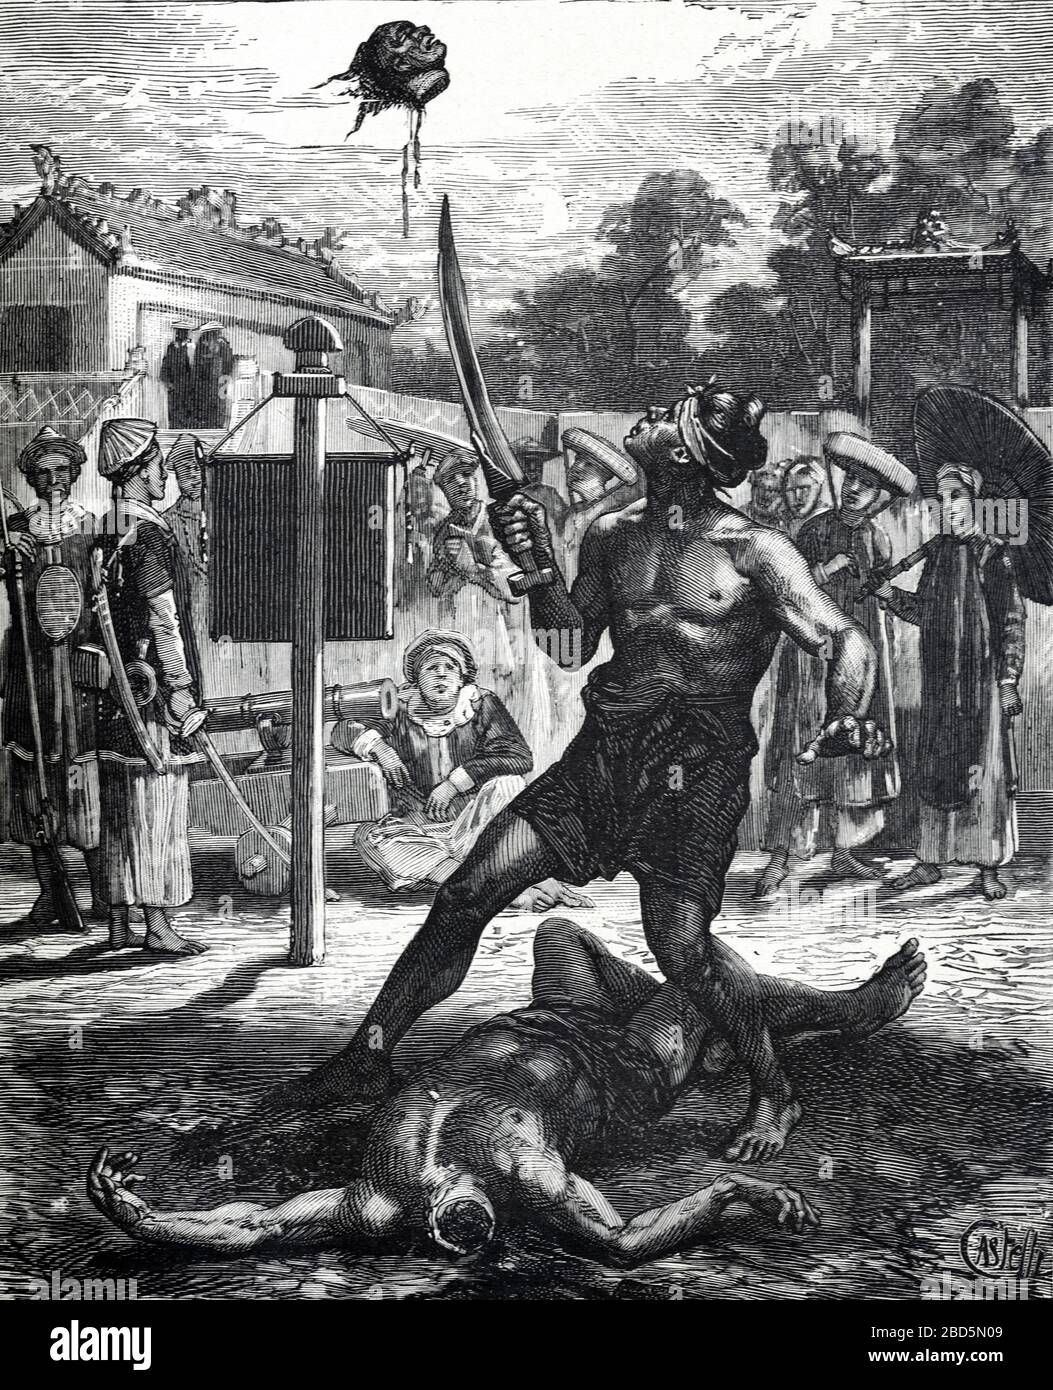 Public Execution or Beheading with Sword in Annan Indochina, now Vietnam. Vintage or Old Illustration or Engraving 1882 Stock Photo